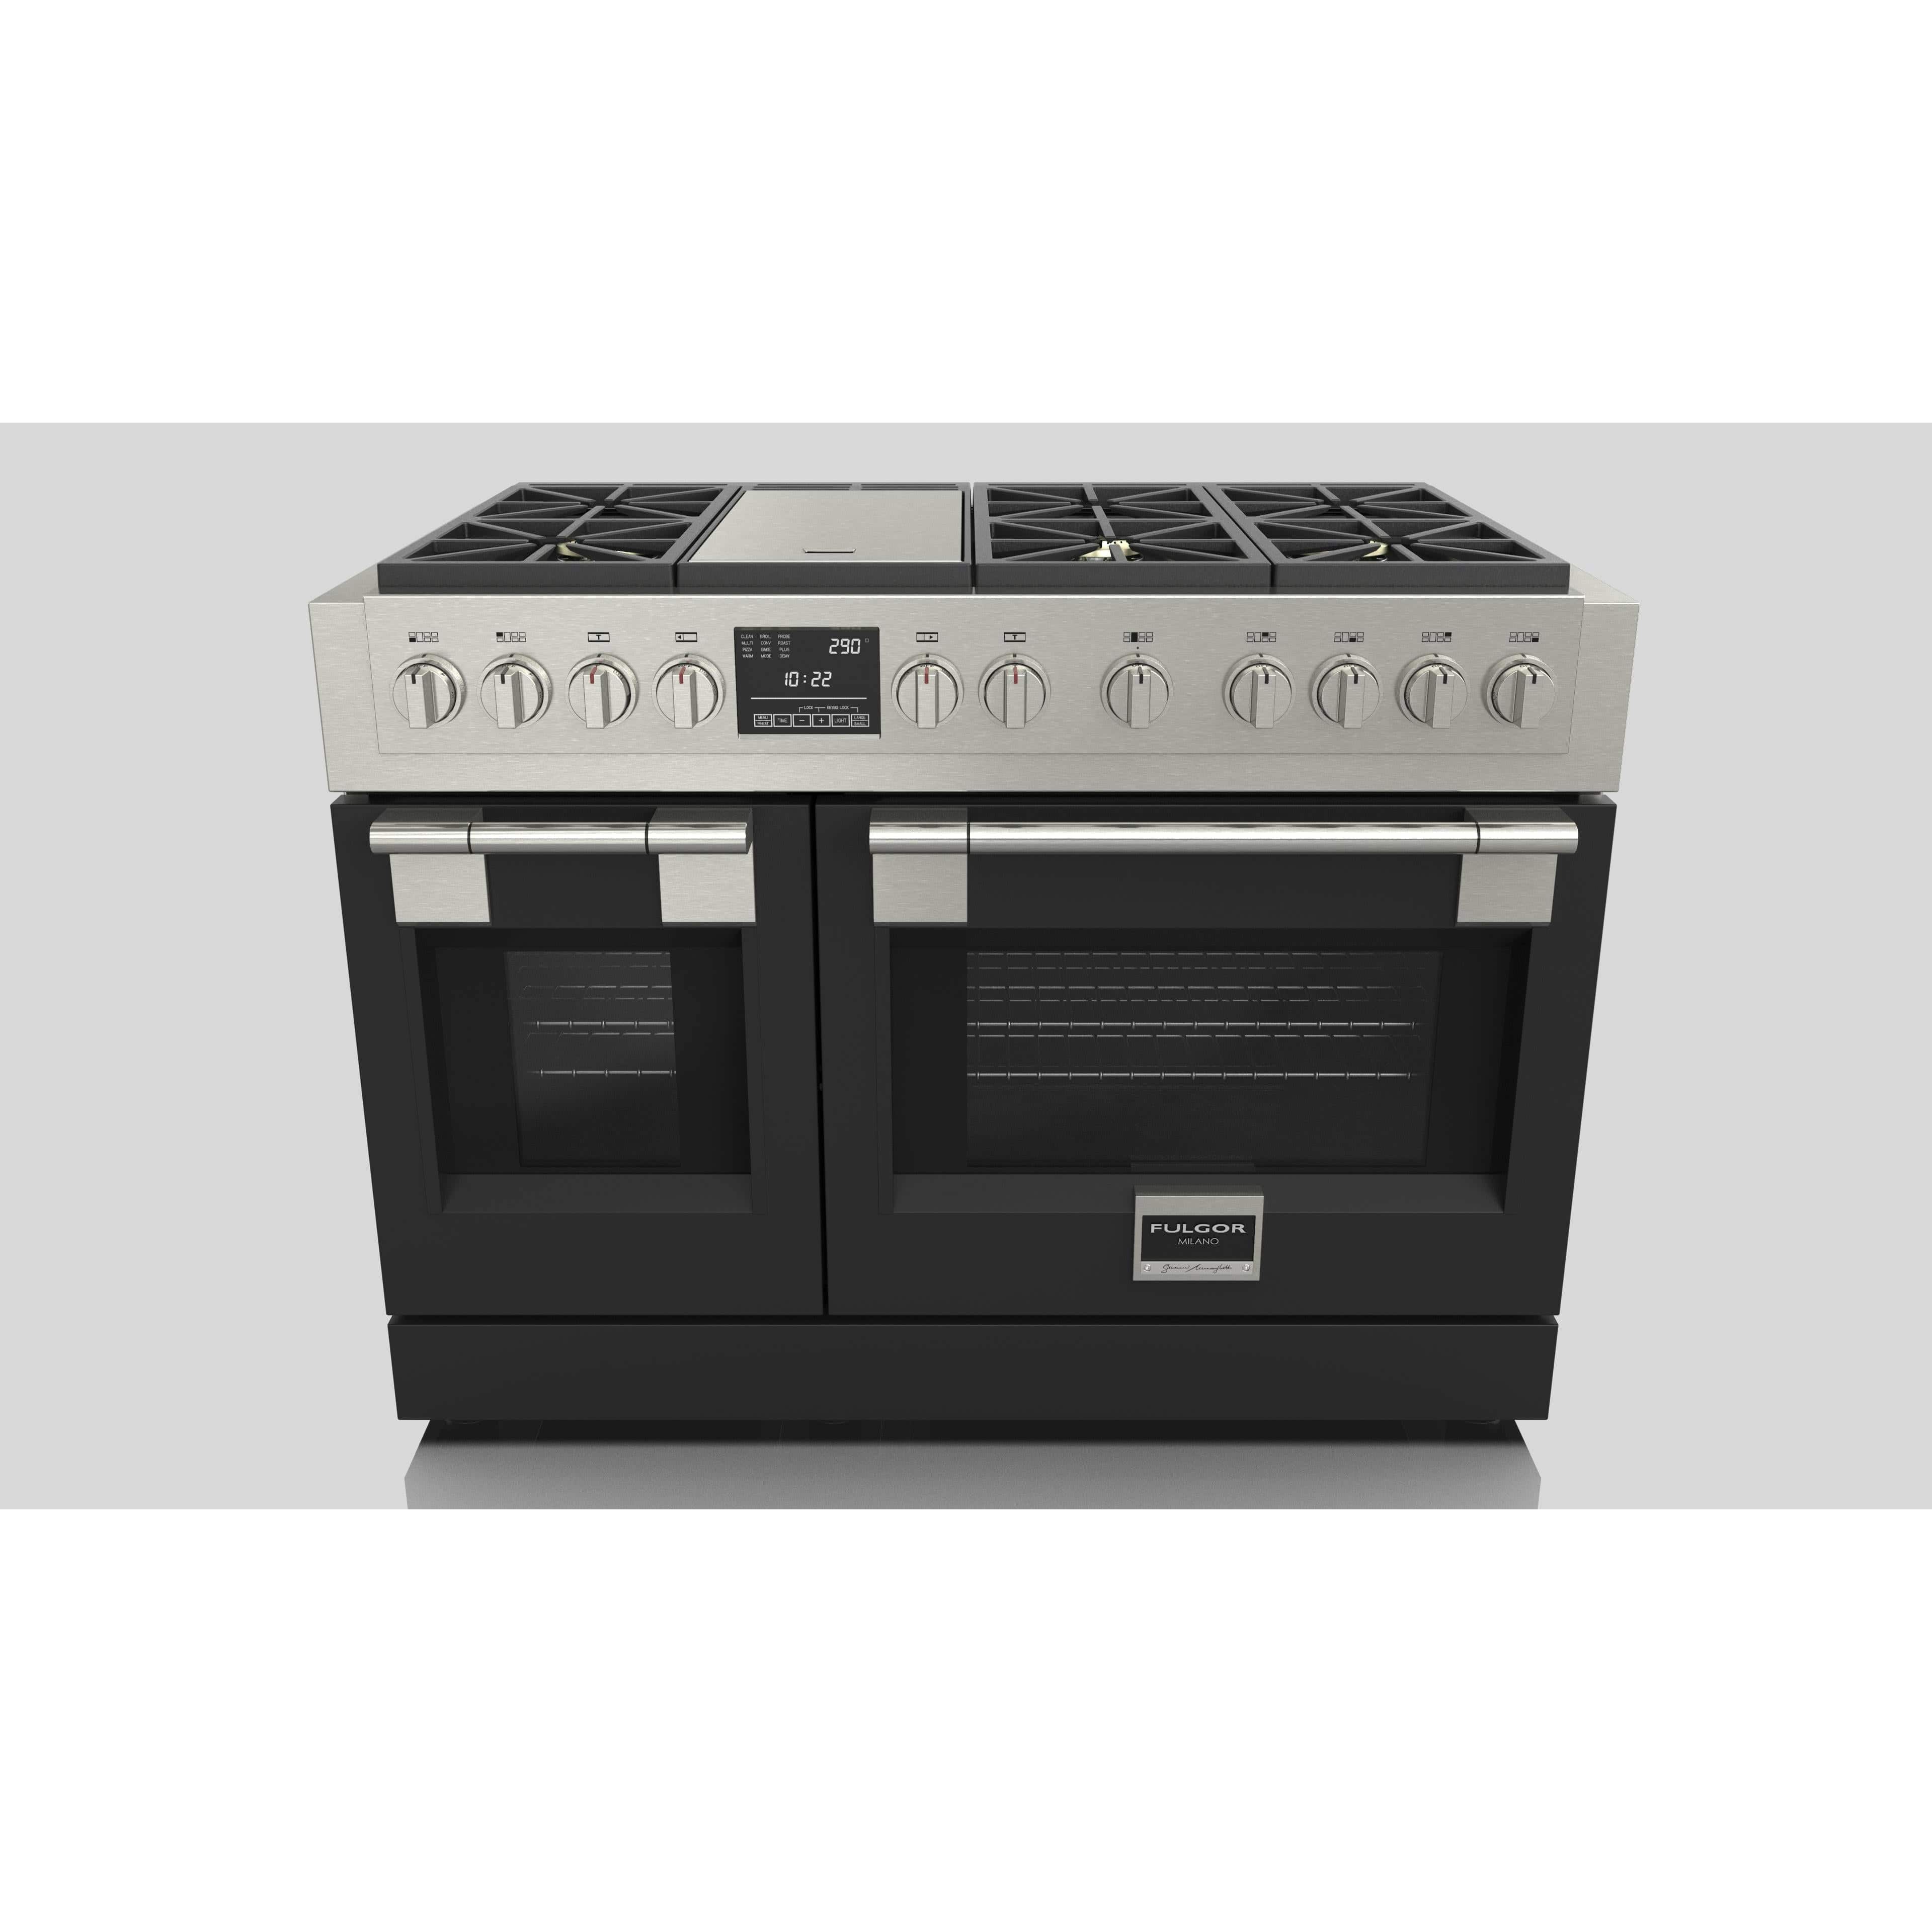 Fulgor Milano 48" Dual Fuel Professional Range with 6 Dual Flame Burners,  6.5 Cu. Ft. Total Capacity Stainless Steel - F6PDF486GS1 Ranges PDRKIT48MB Luxury Appliances Direct